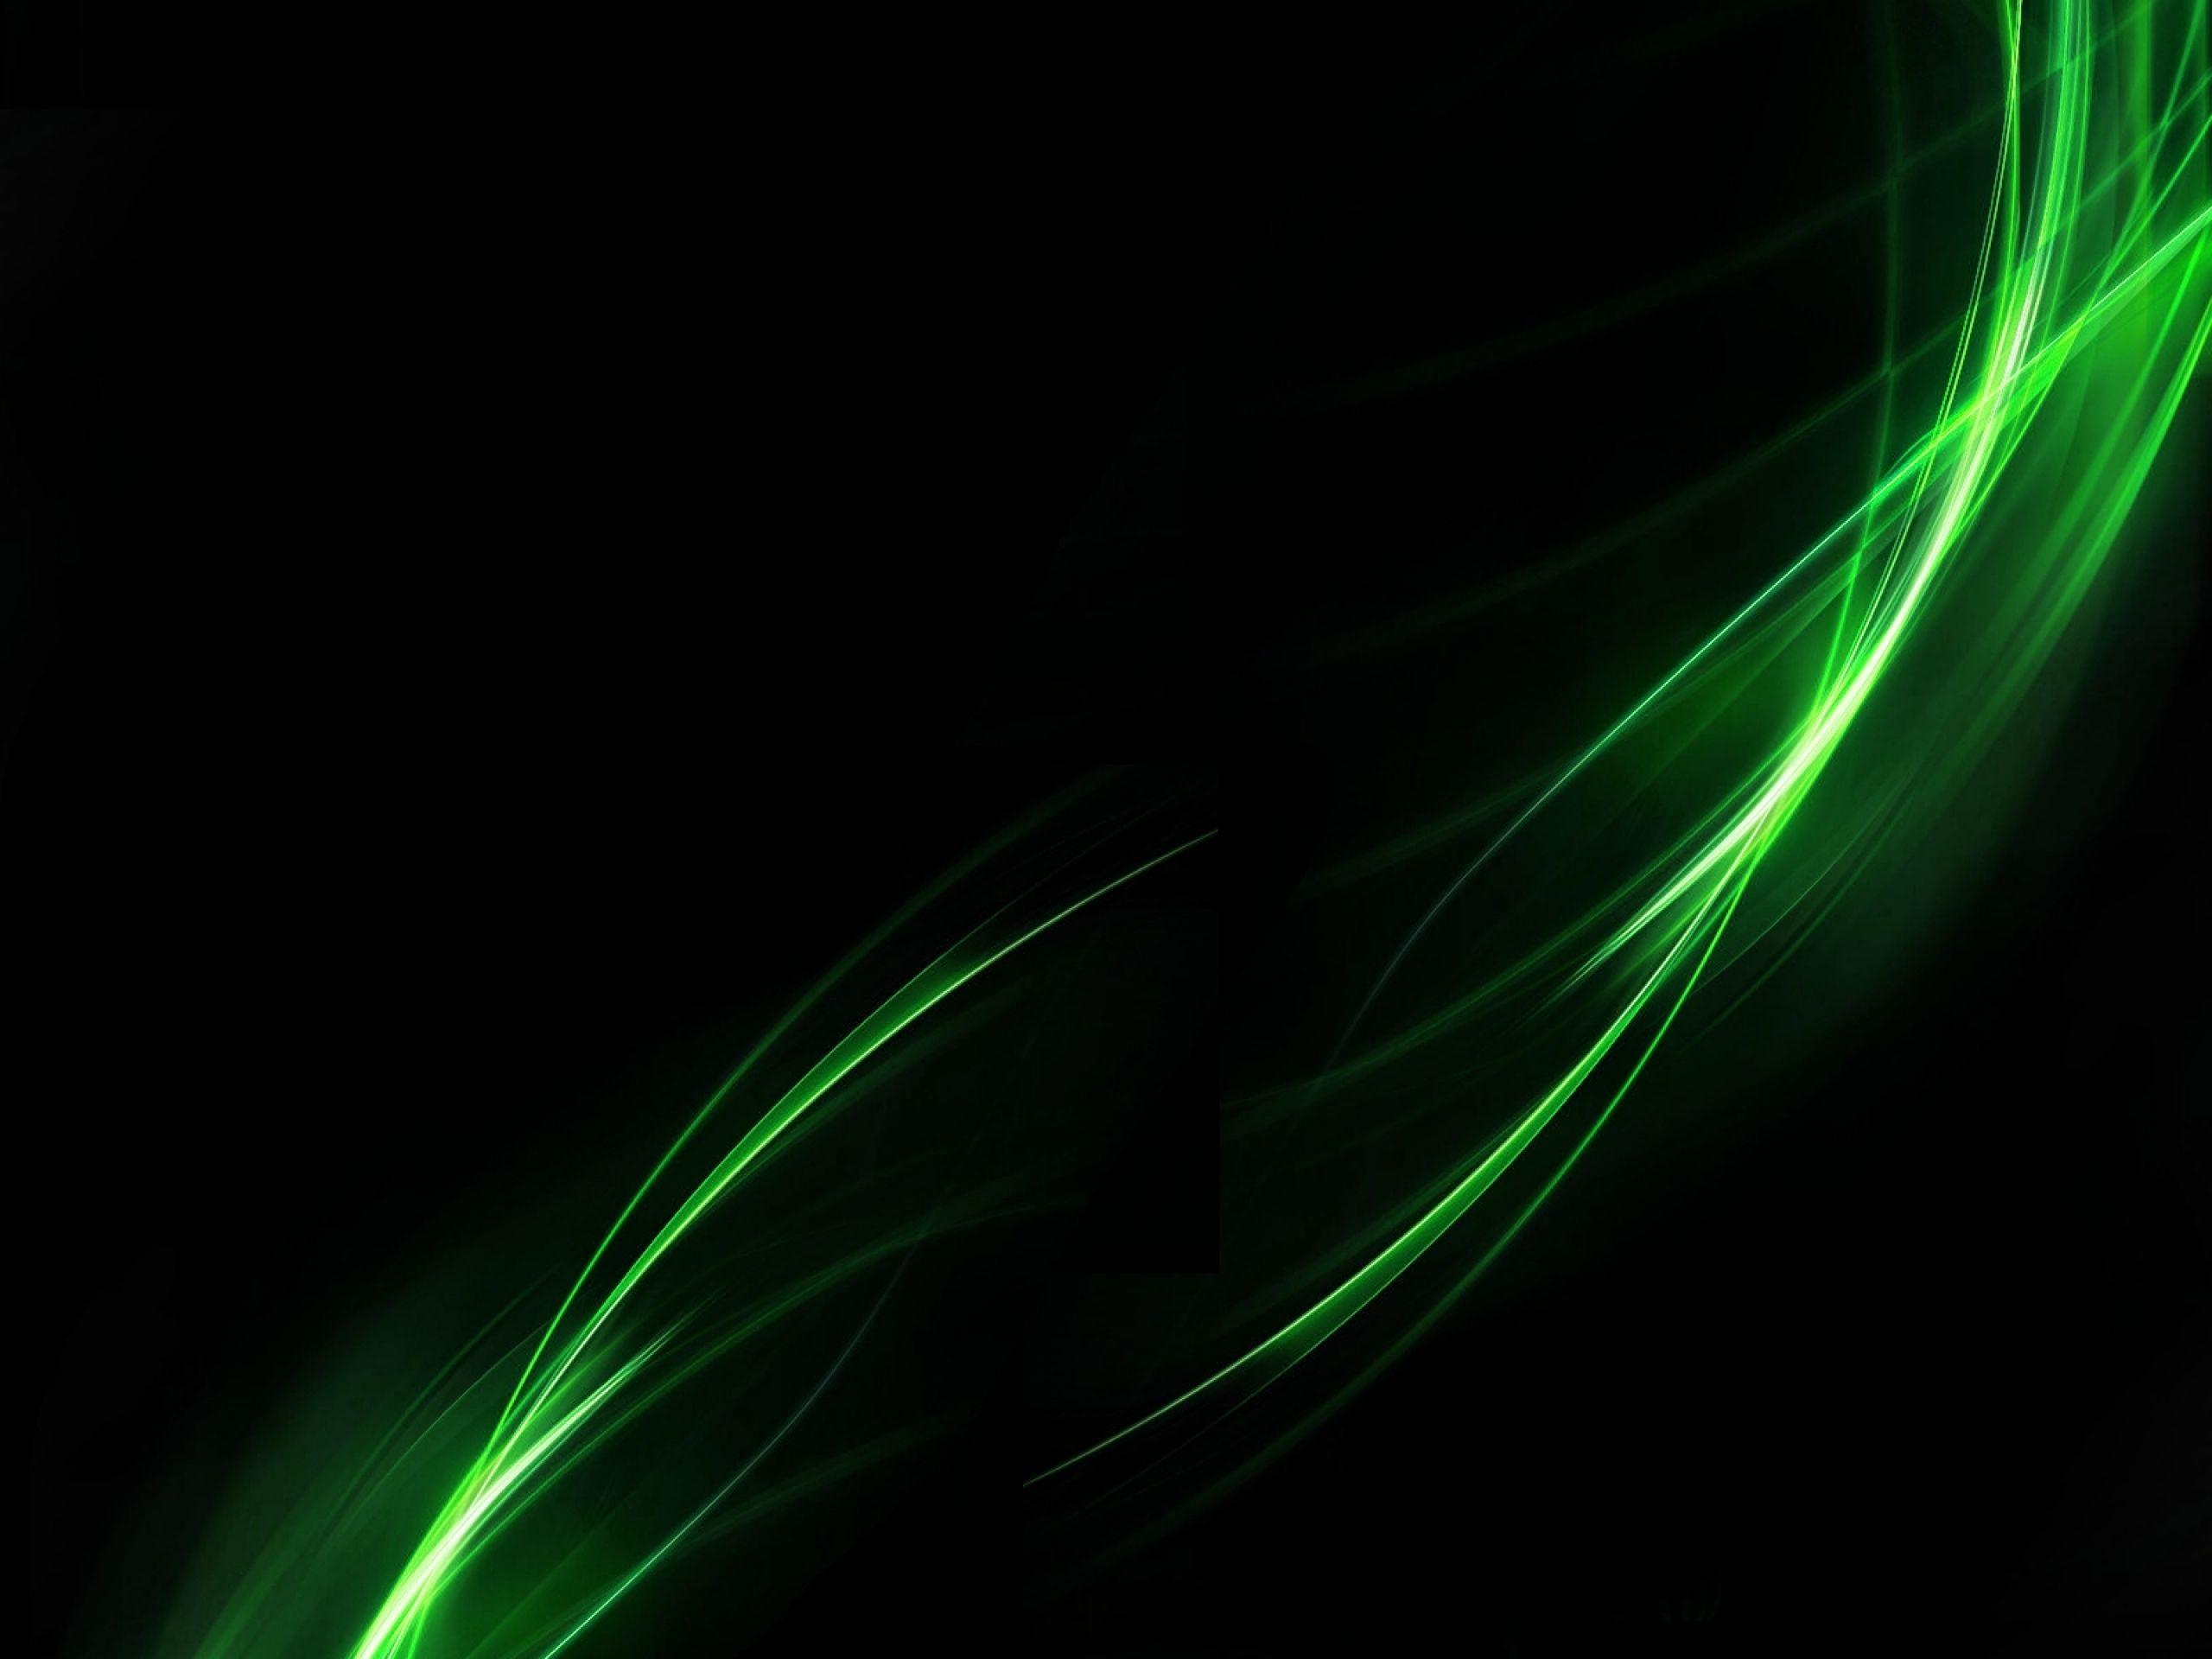 Abstract Green Lines wallpaper. Abstract Green Lines stock